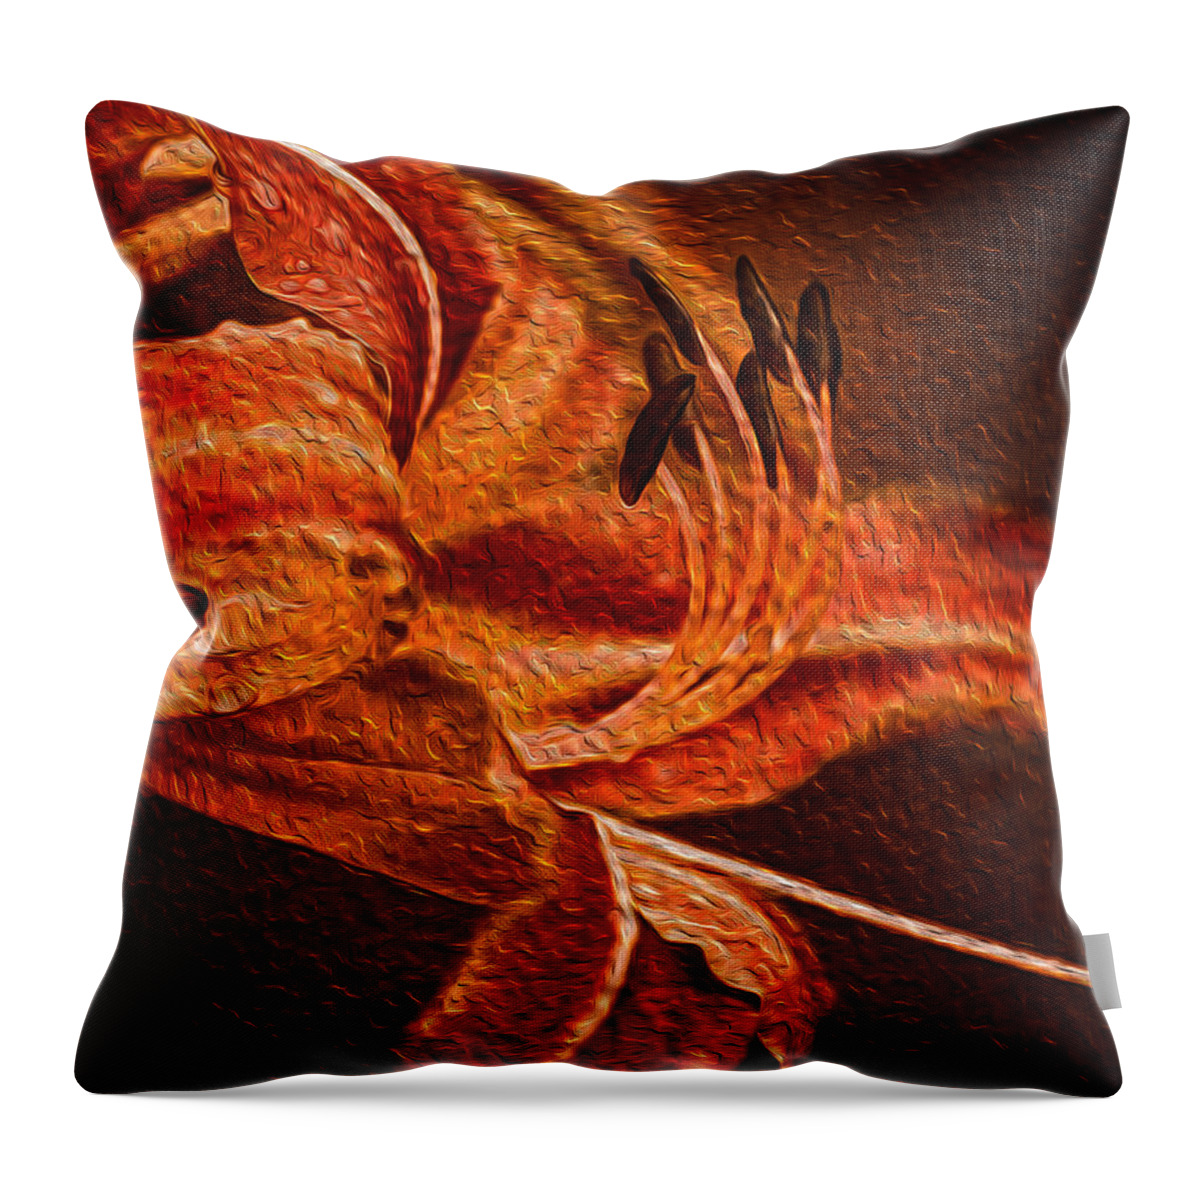 Orange Throw Pillow featuring the digital art Orange Flower #1 by Prince Andre Faubert